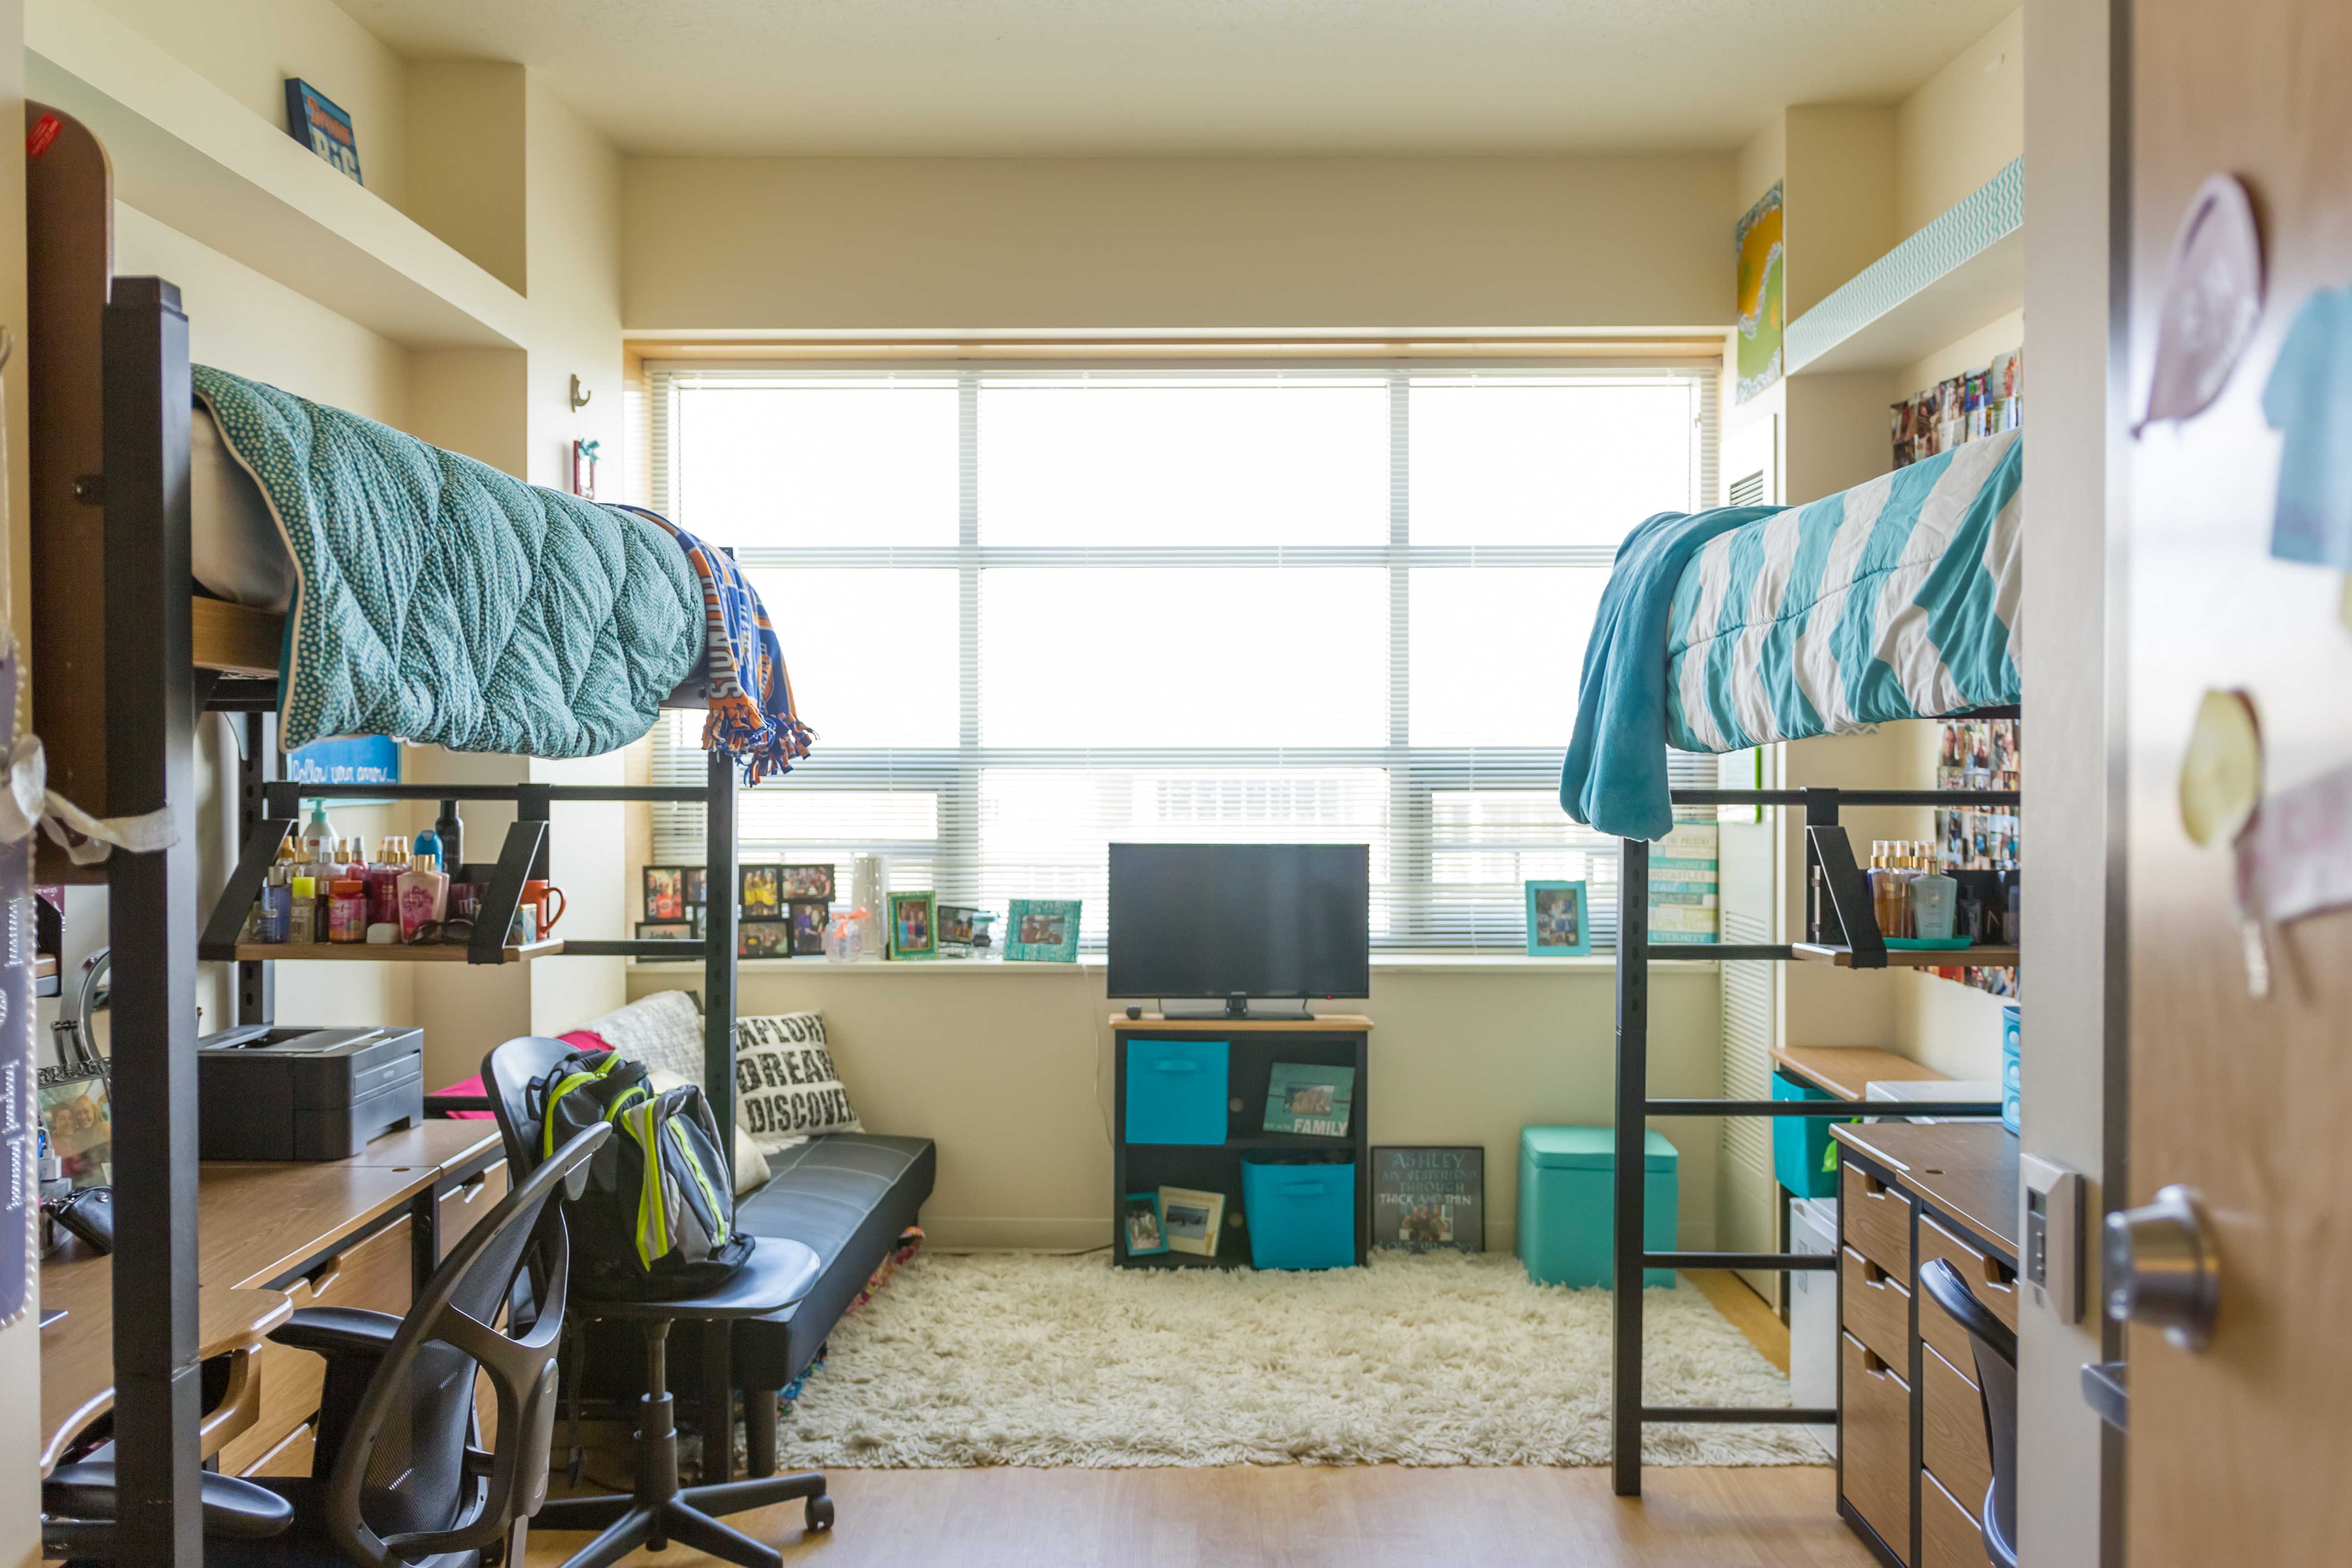 Keeping your dorm room organized | The Daily Illini